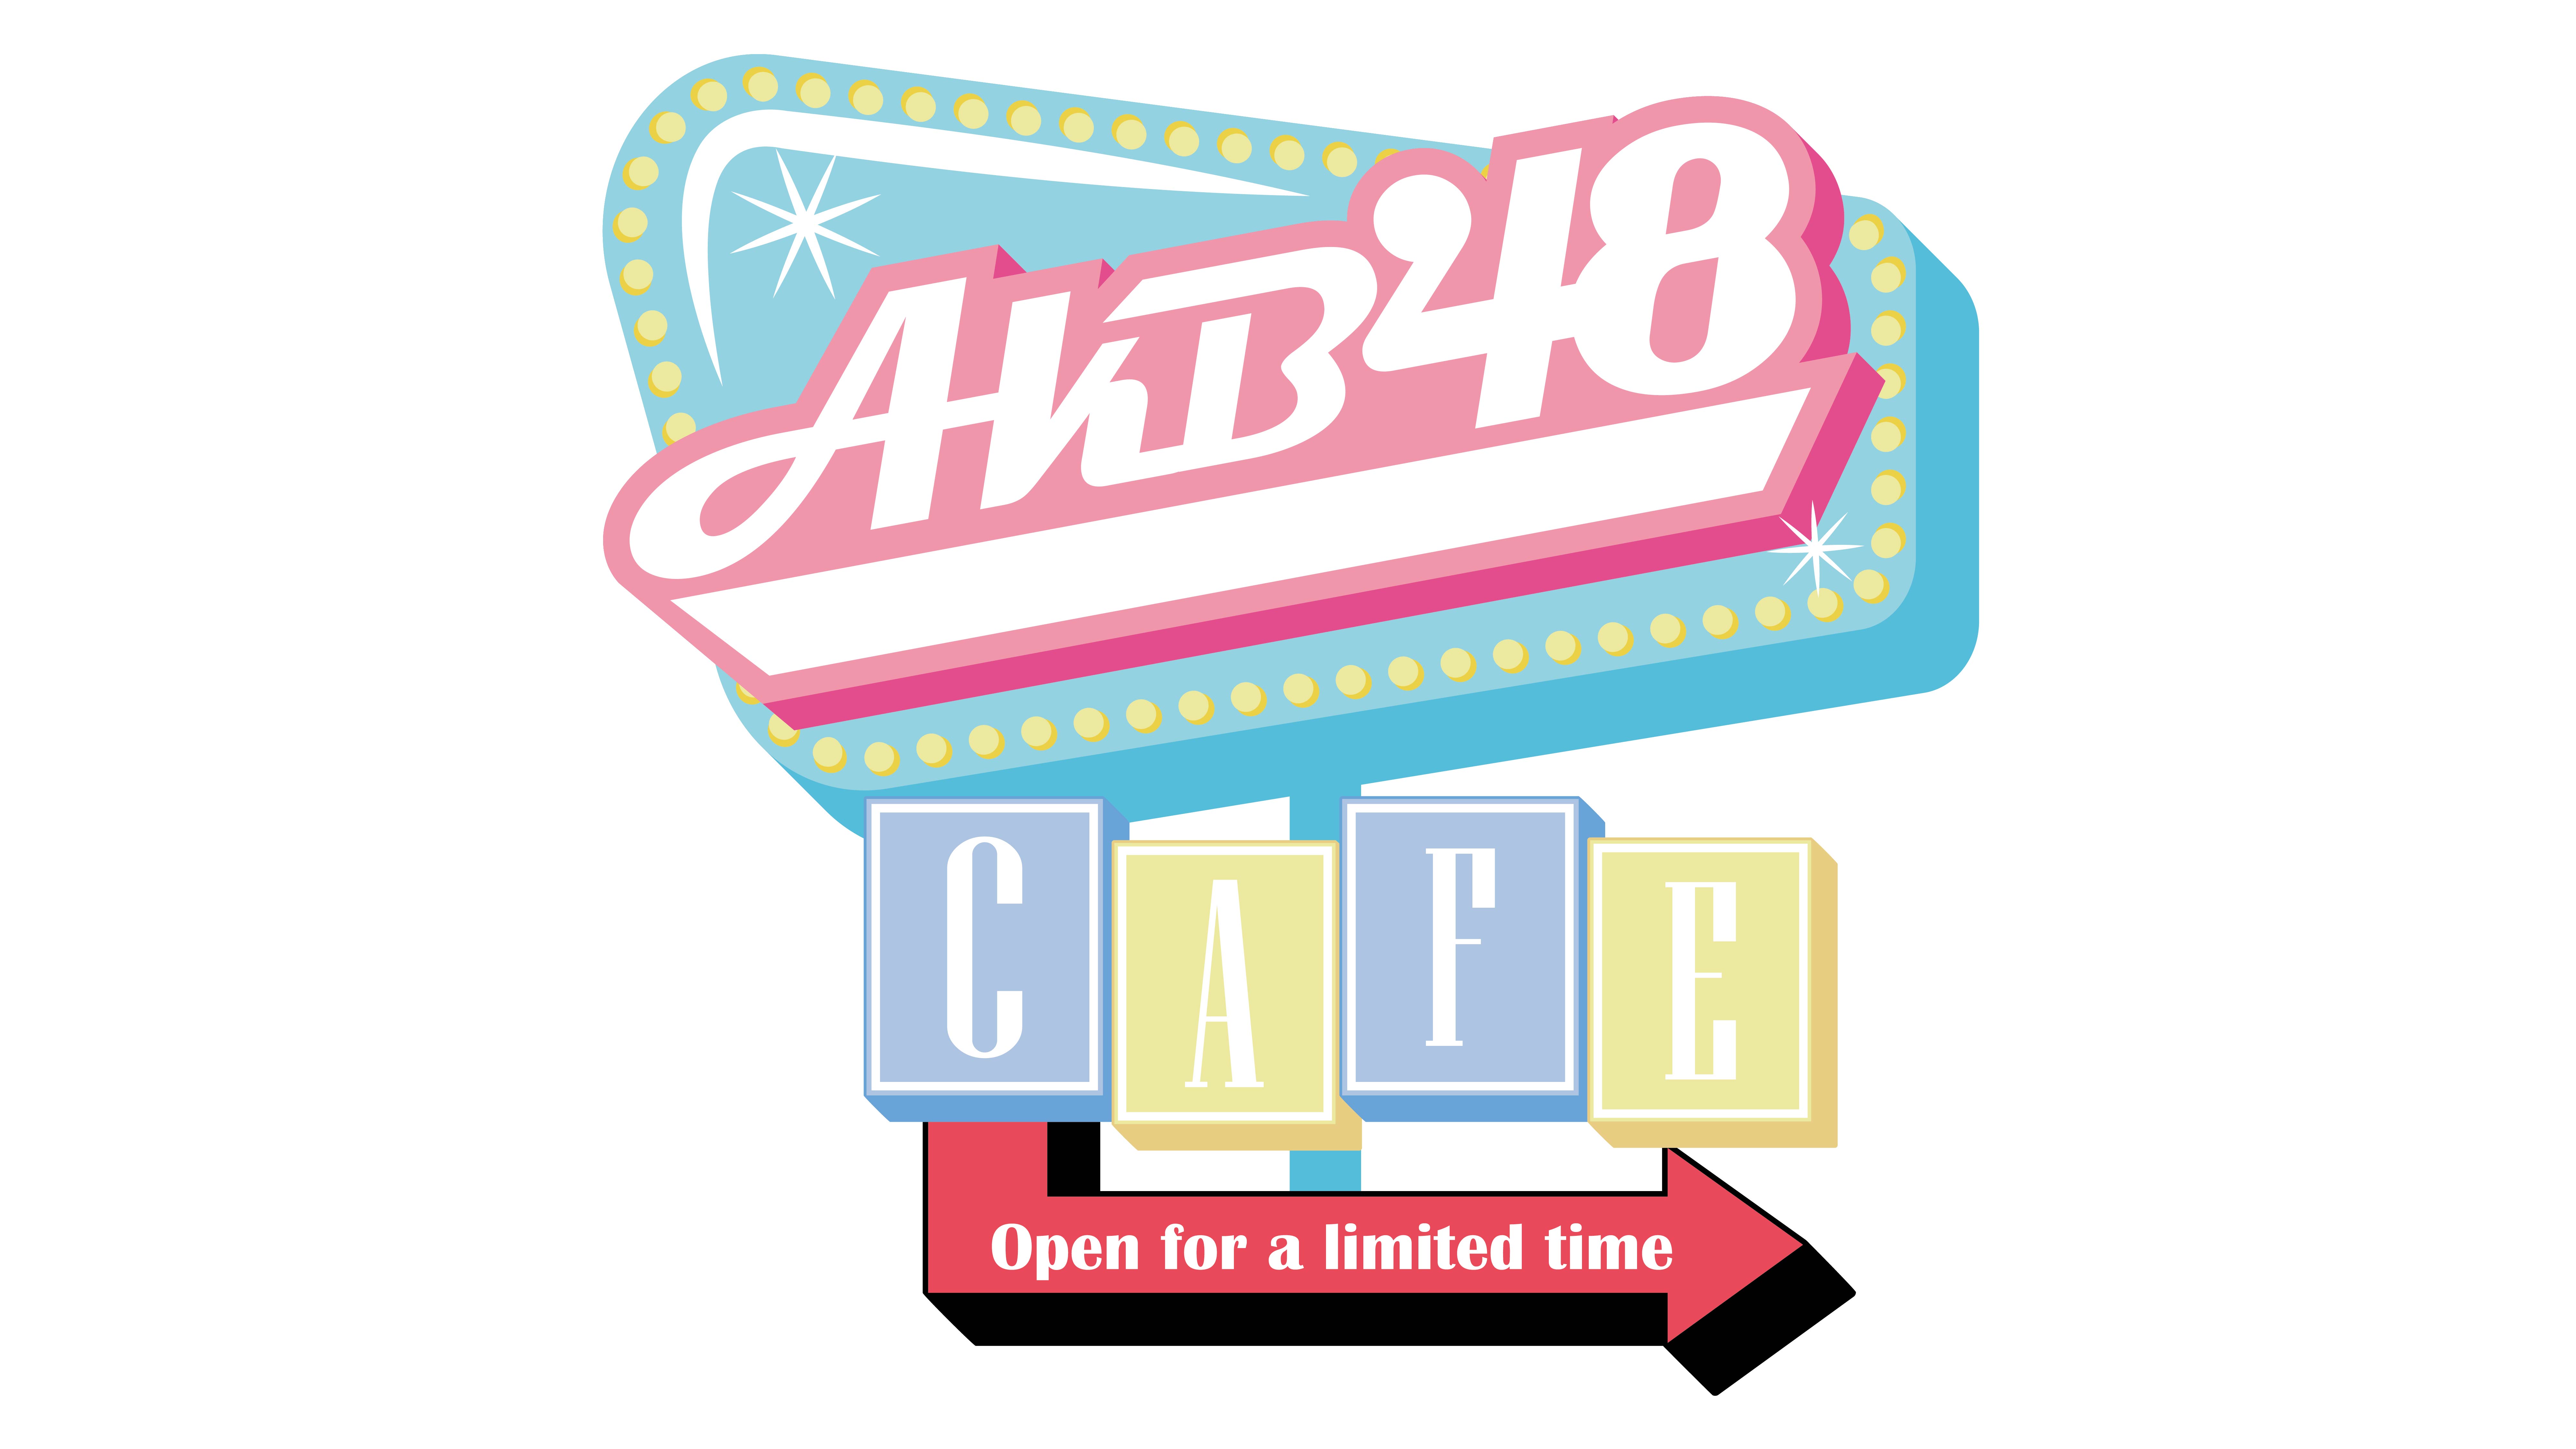 AKB48 CAFE ～OPEN for a limited time～